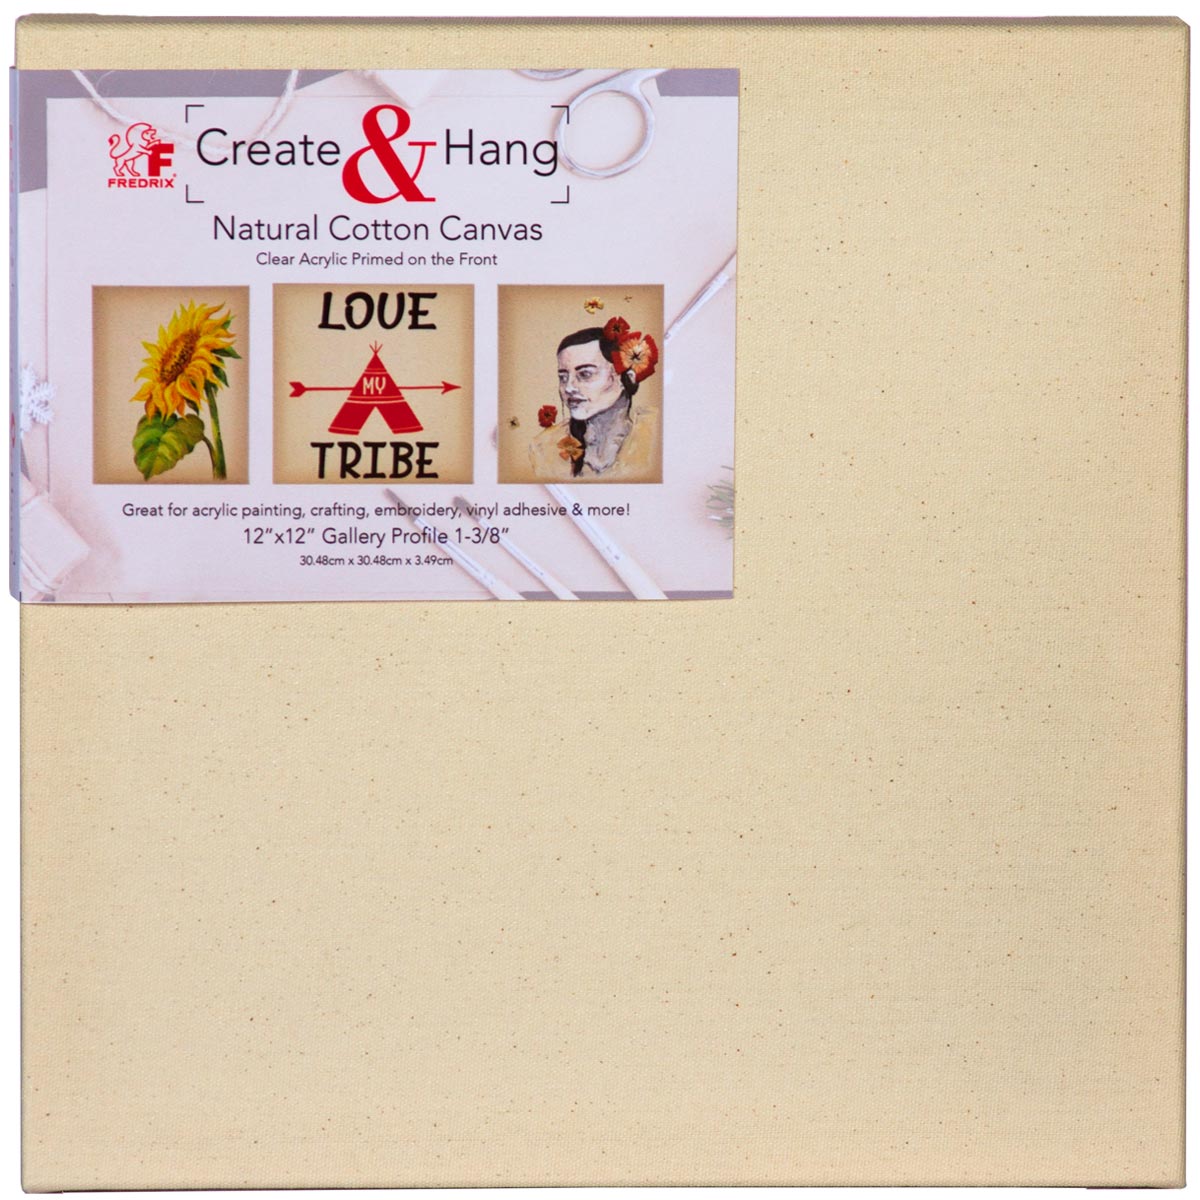 Create & Hang Natural Cotton Canvas, 8oz Primed 12in x 12in